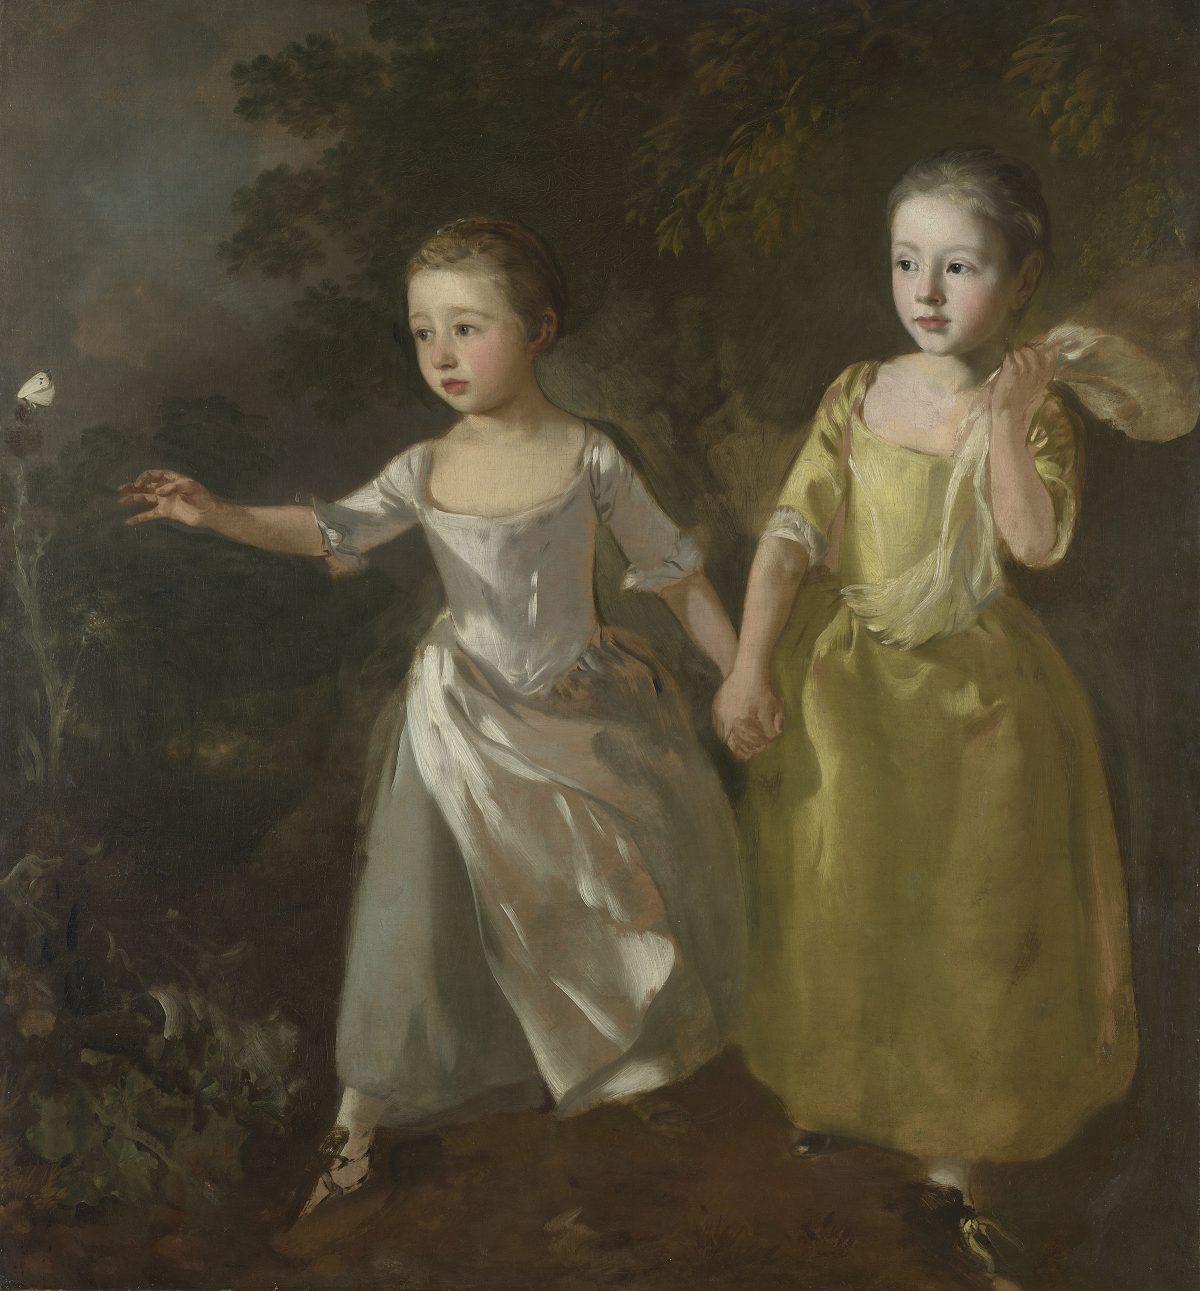 “Mary and Margaret Gainsborough, the Artist’s Daughters Chasing a Butterfly,” circa 1756, by Thomas Gainsborough. Henry Vaughan Bequest, 1900, The National Gallery, London. This painting is not in the Princeton exhibition. (The National Gallery, London)